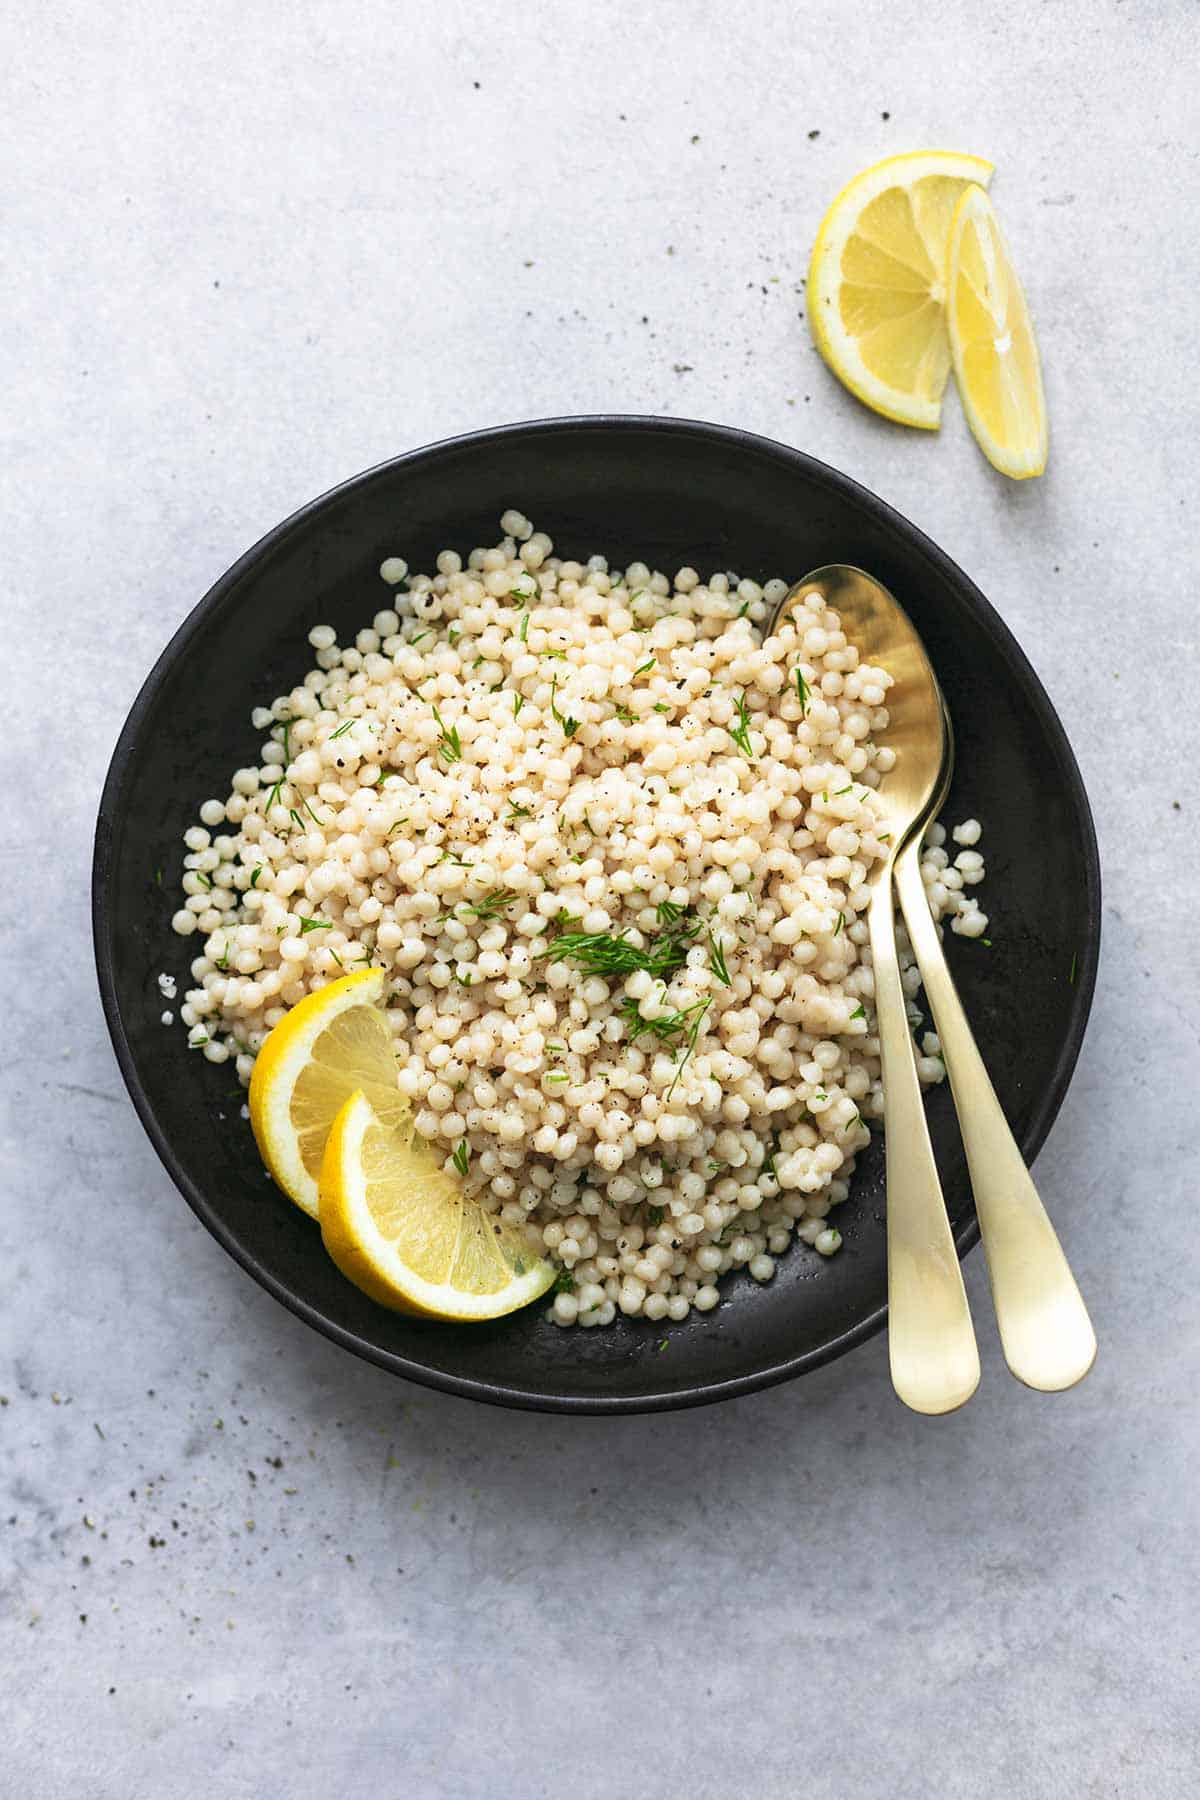 top view of lemon couscous with lemon wedges and two spoons in a bowl.